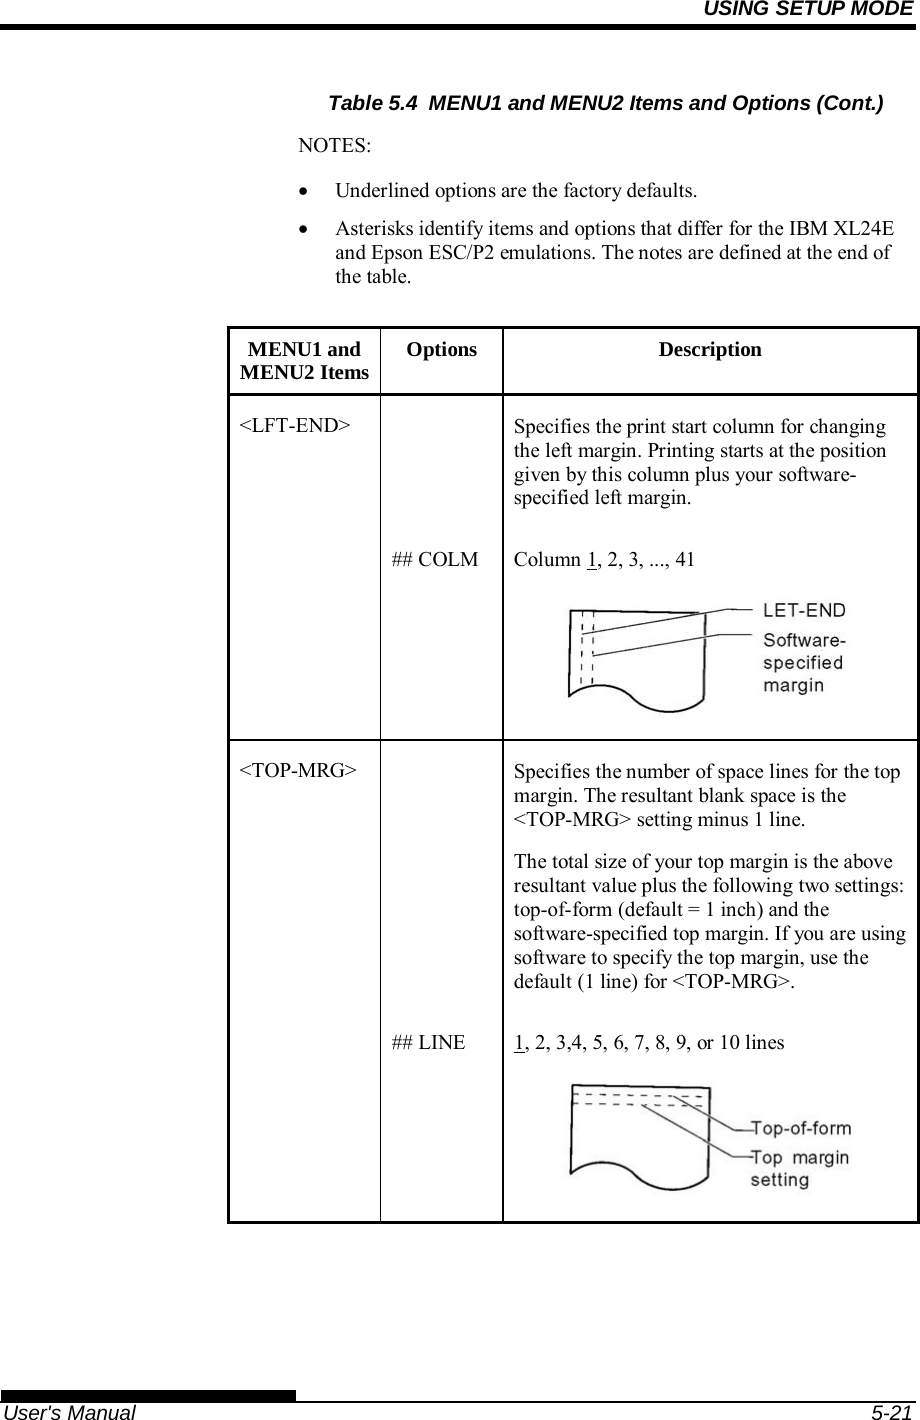 USING SETUP MODE   User&apos;s Manual  5-21 Table 5.4  MENU1 and MENU2 Items and Options (Cont.) NOTES:  Underlined options are the factory defaults.  Asterisks identify items and options that differ for the IBM XL24E and Epson ESC/P2 emulations. The notes are defined at the end of the table.  MENU1 and MENU2 Items Options Description &lt;LFT-END&gt;   Specifies the print start column for changing the left margin. Printing starts at the position given by this column plus your software-specified left margin.   ## COLM  Column 1, 2, 3, ..., 41  &lt;TOP-MRG&gt;   Specifies the number of space lines for the top margin. The resultant blank space is the &lt;TOP-MRG&gt; setting minus 1 line. The total size of your top margin is the above resultant value plus the following two settings: top-of-form (default = 1 inch) and the software-specified top margin. If you are using software to specify the top margin, use the default (1 line) for &lt;TOP-MRG&gt;.   ## LINE  1, 2, 3,4, 5, 6, 7, 8, 9, or 10 lines   